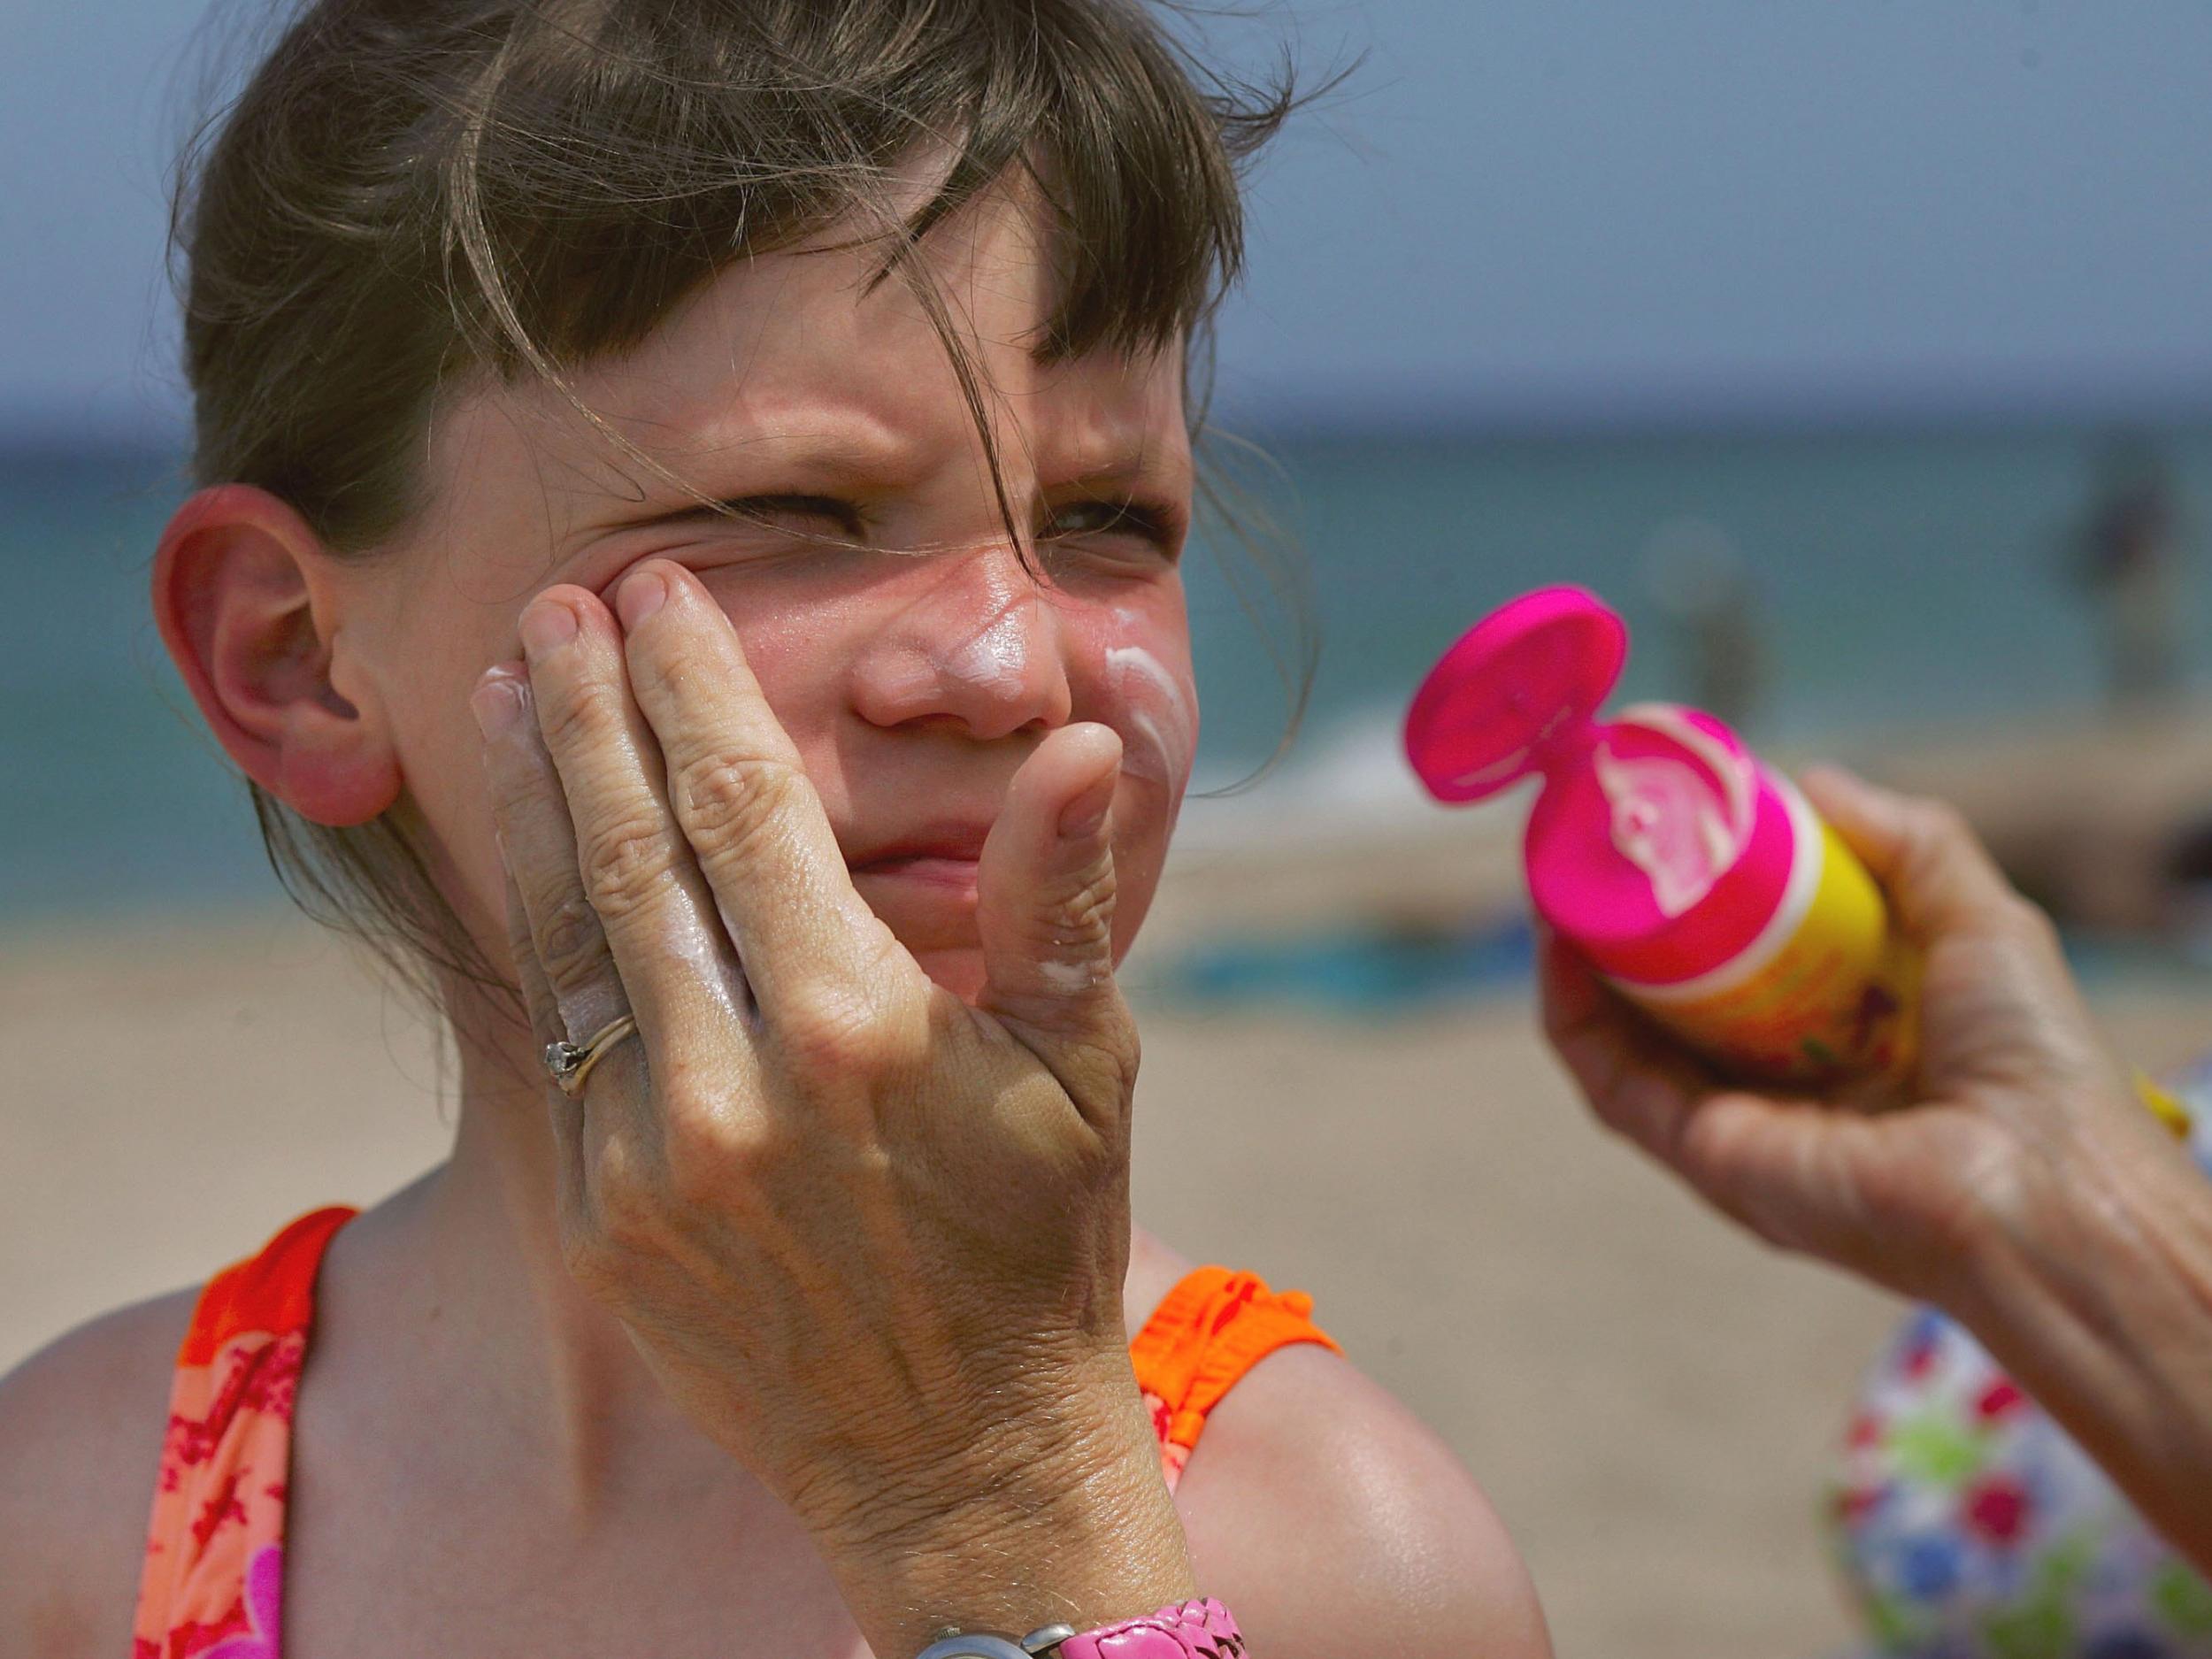 Two thirds of parents aren’t sure how much sun cream to apply to their children.